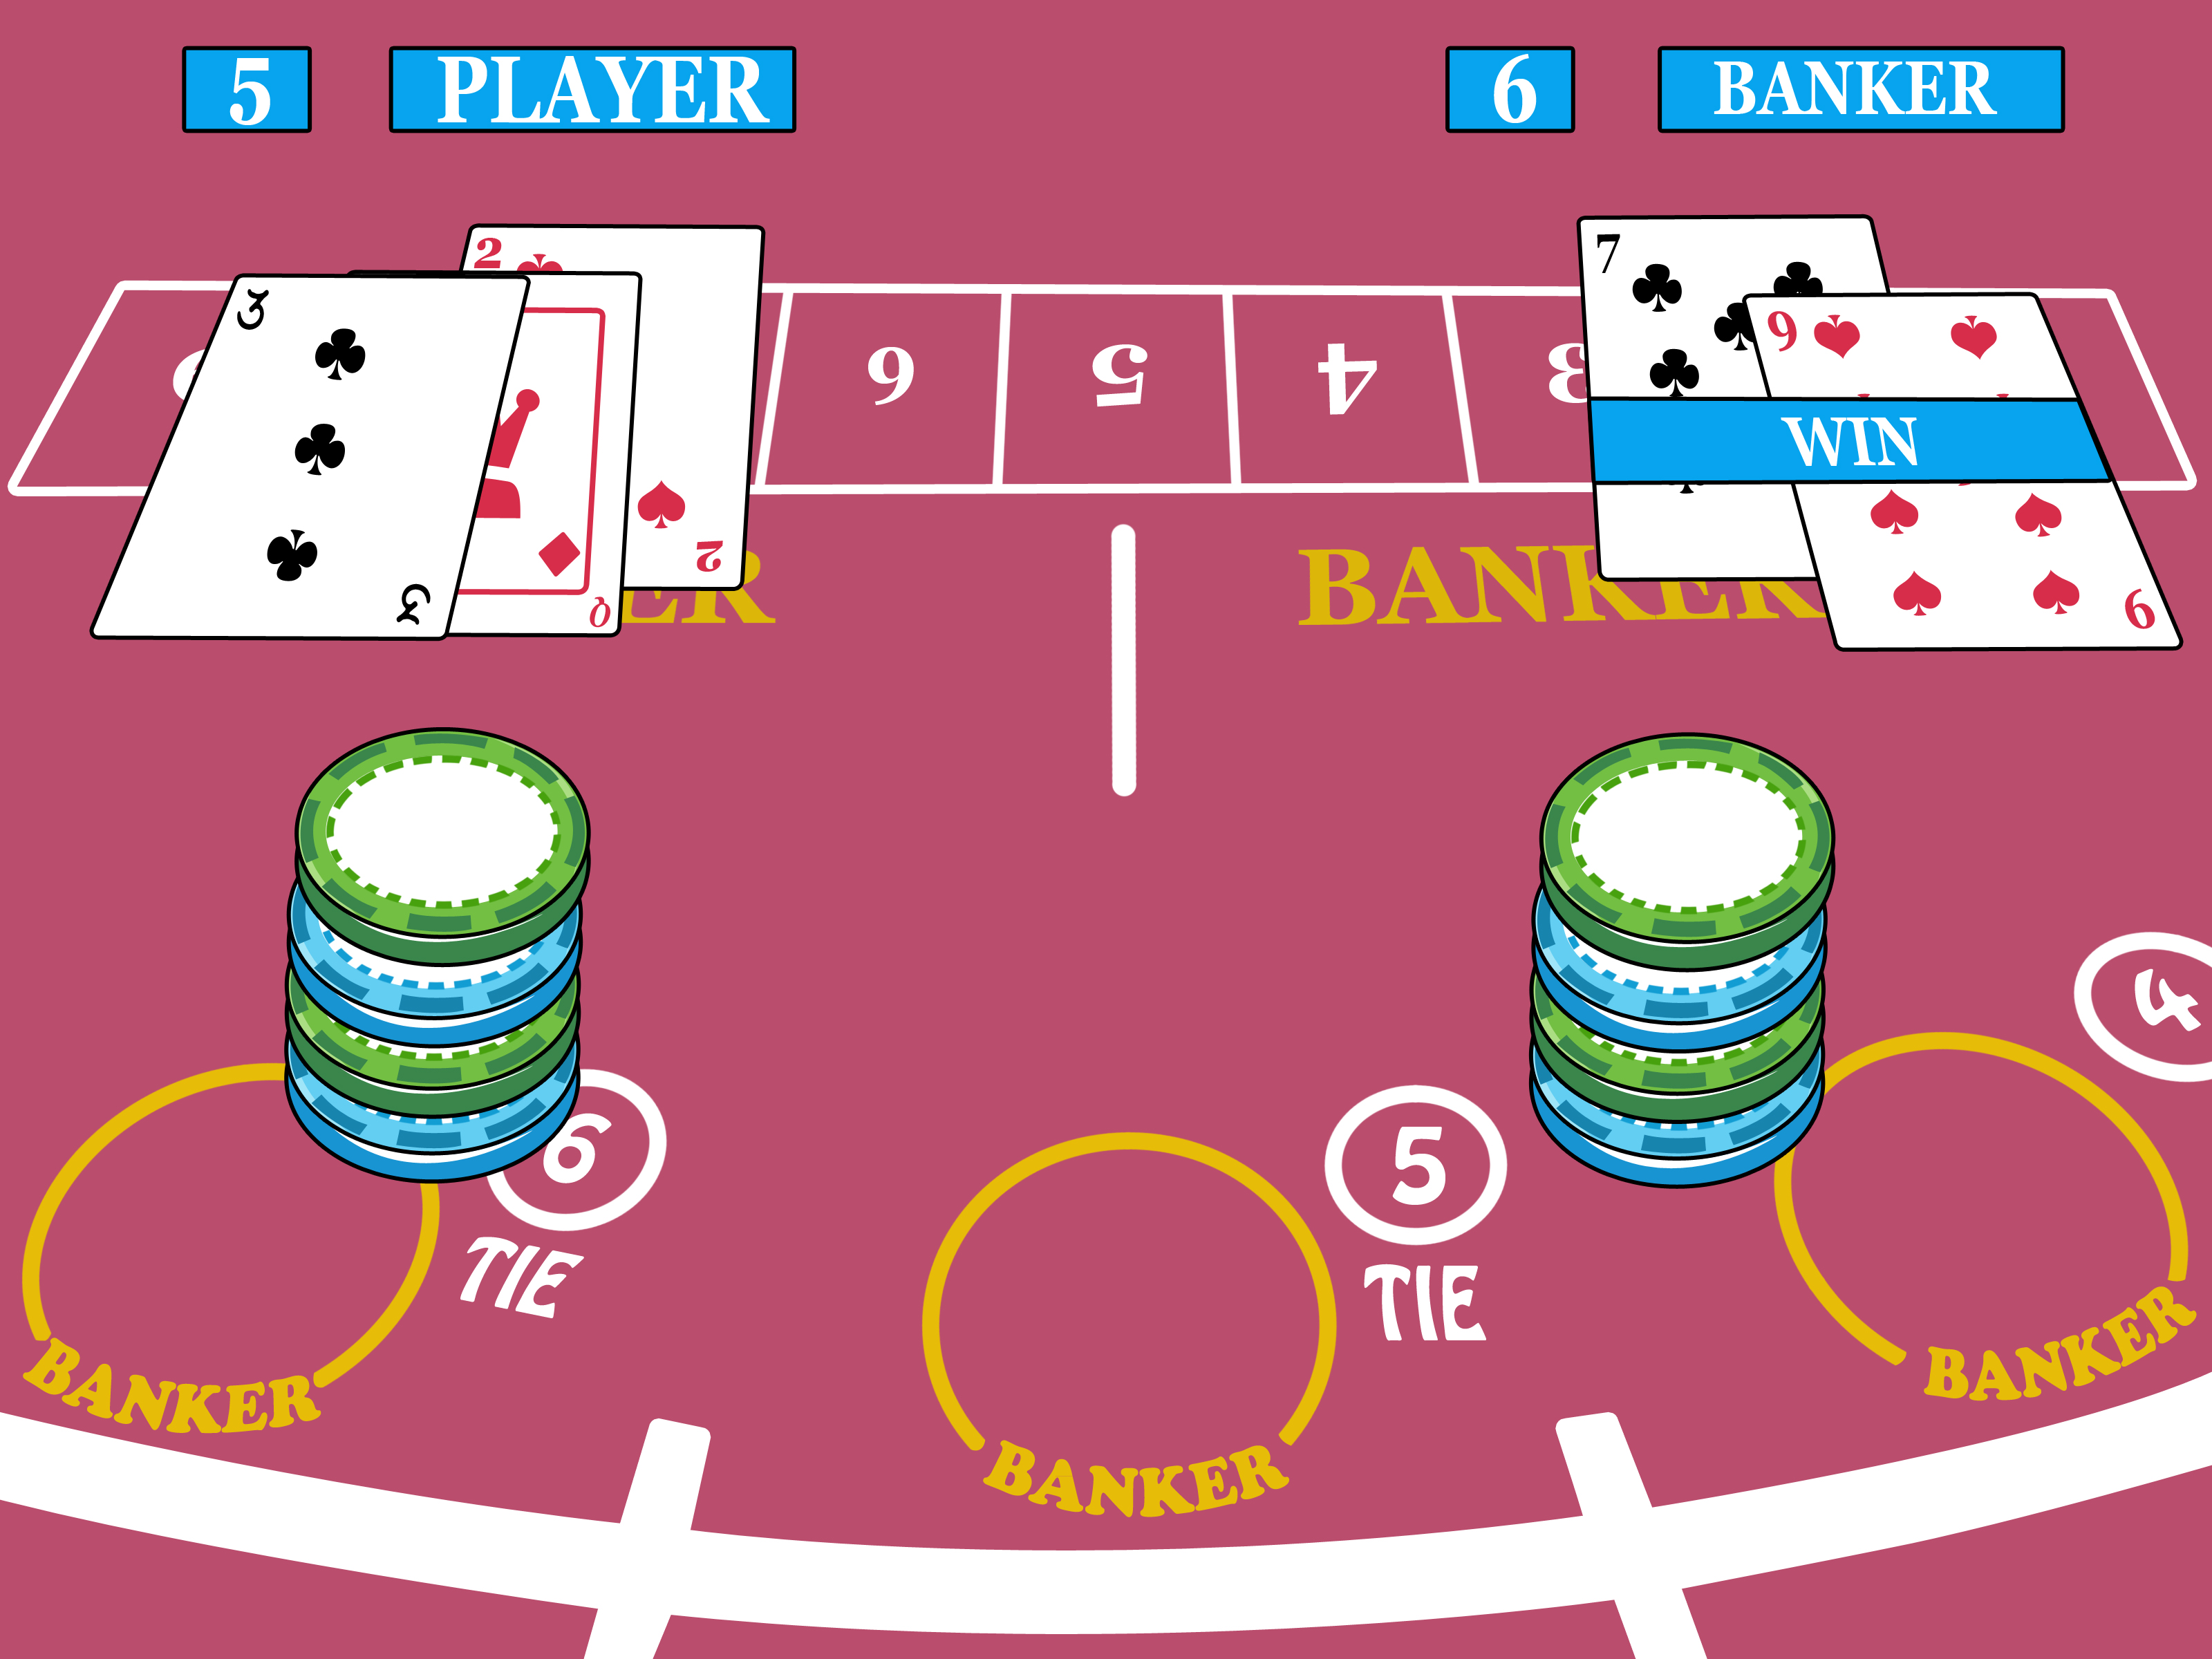 What to know to avoid mistakes in Baccarat